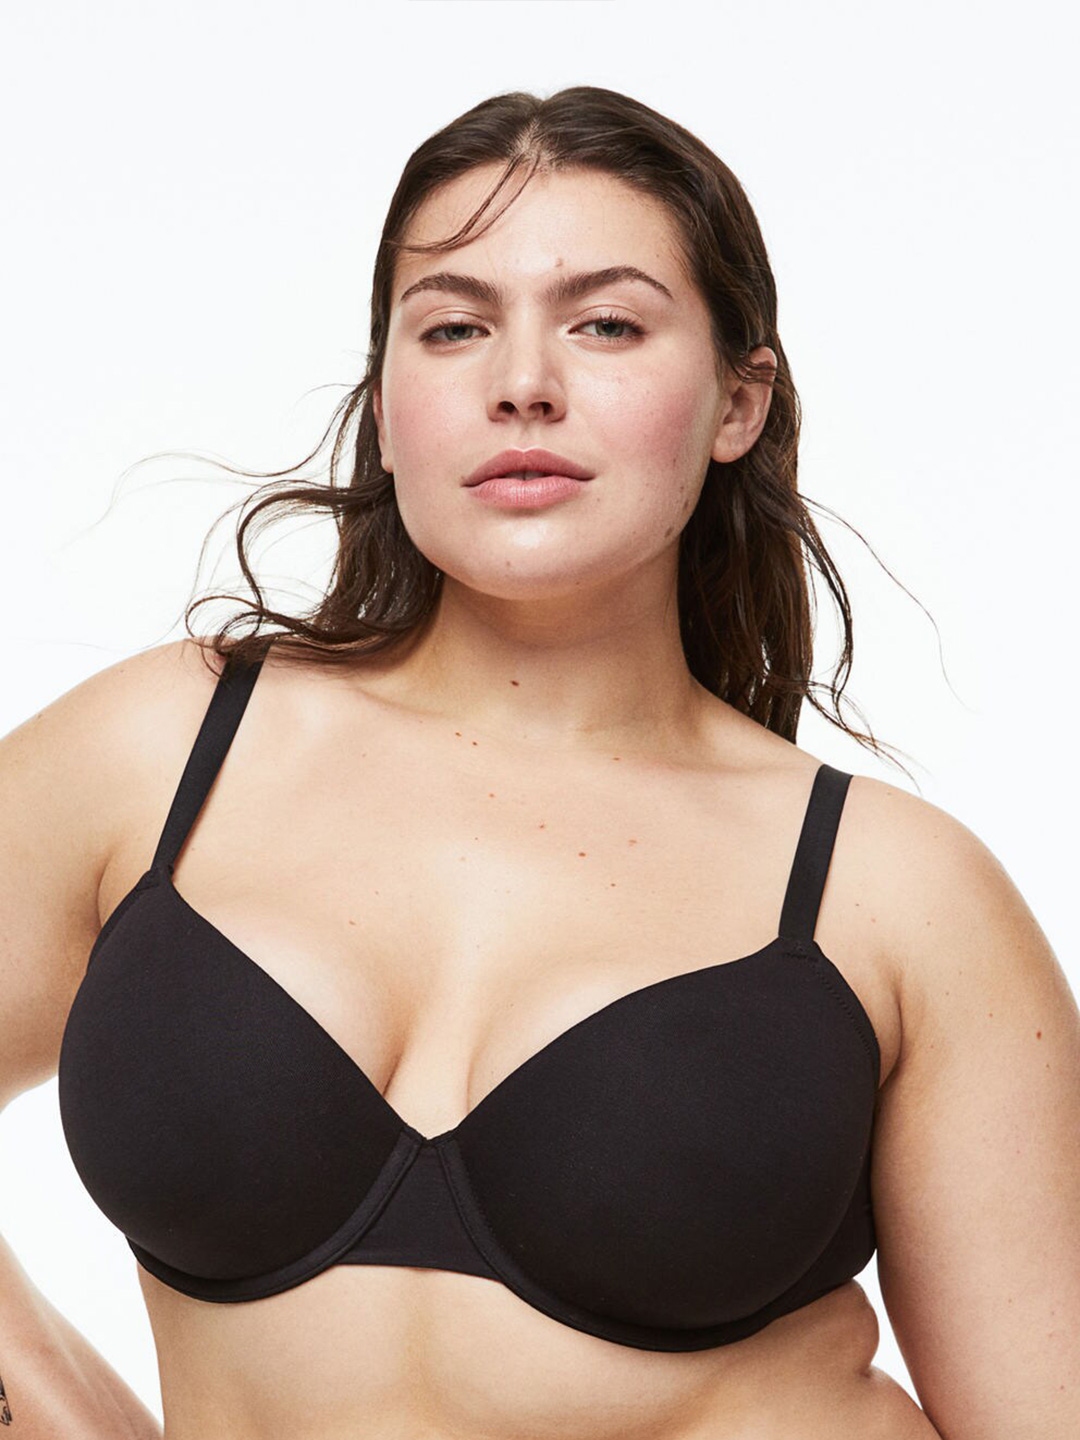 2-pack Jersey Super Push-up Bras